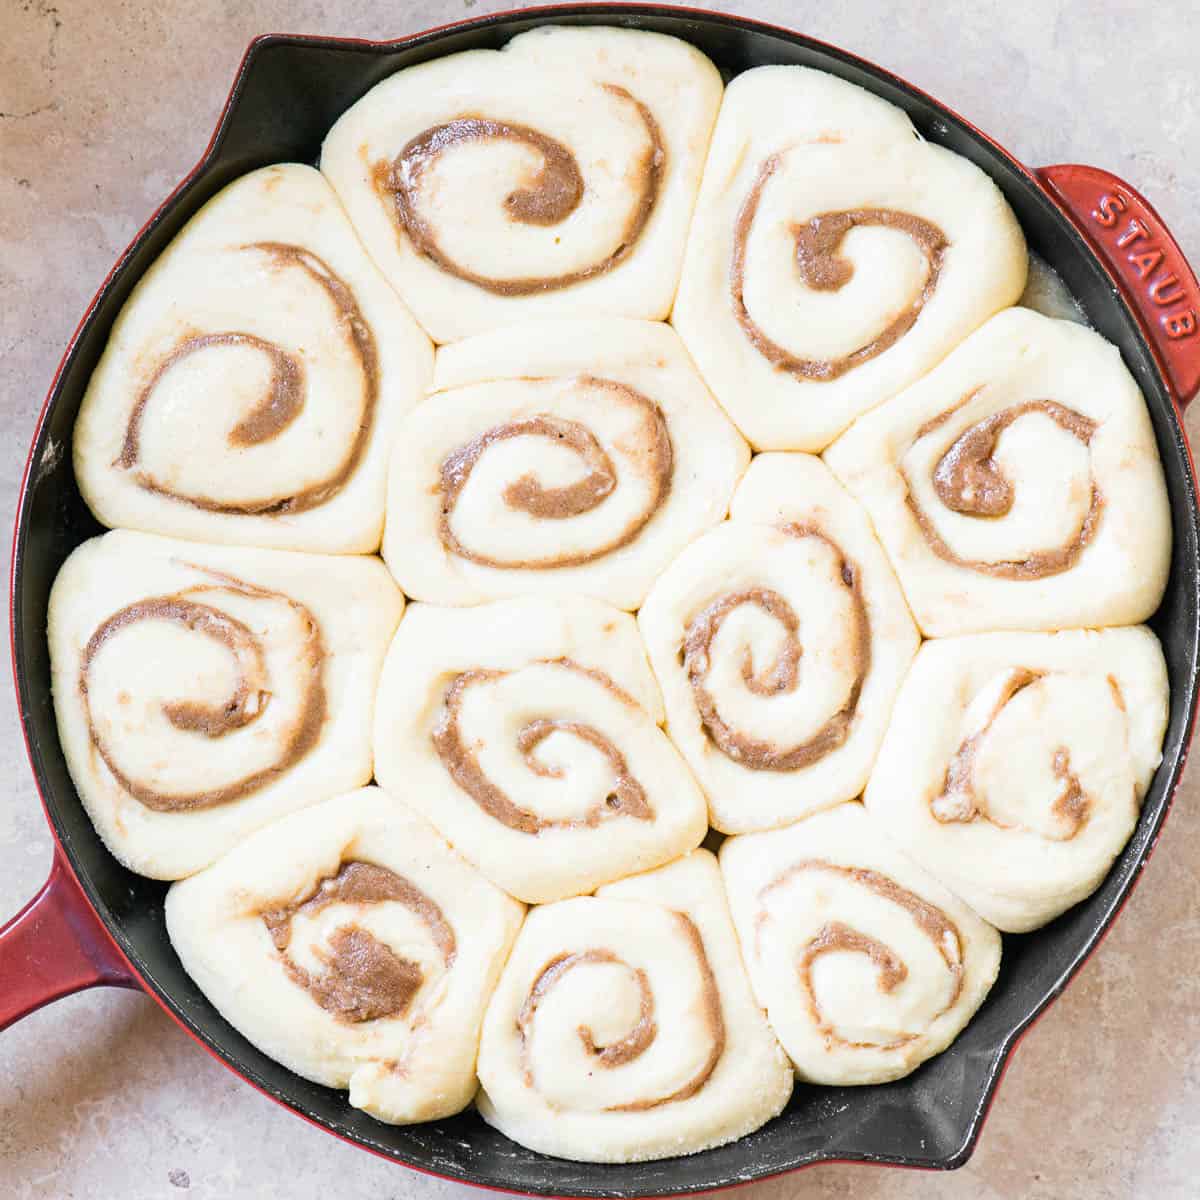 uncooked Homemade Cinnamon Rolls that have risen